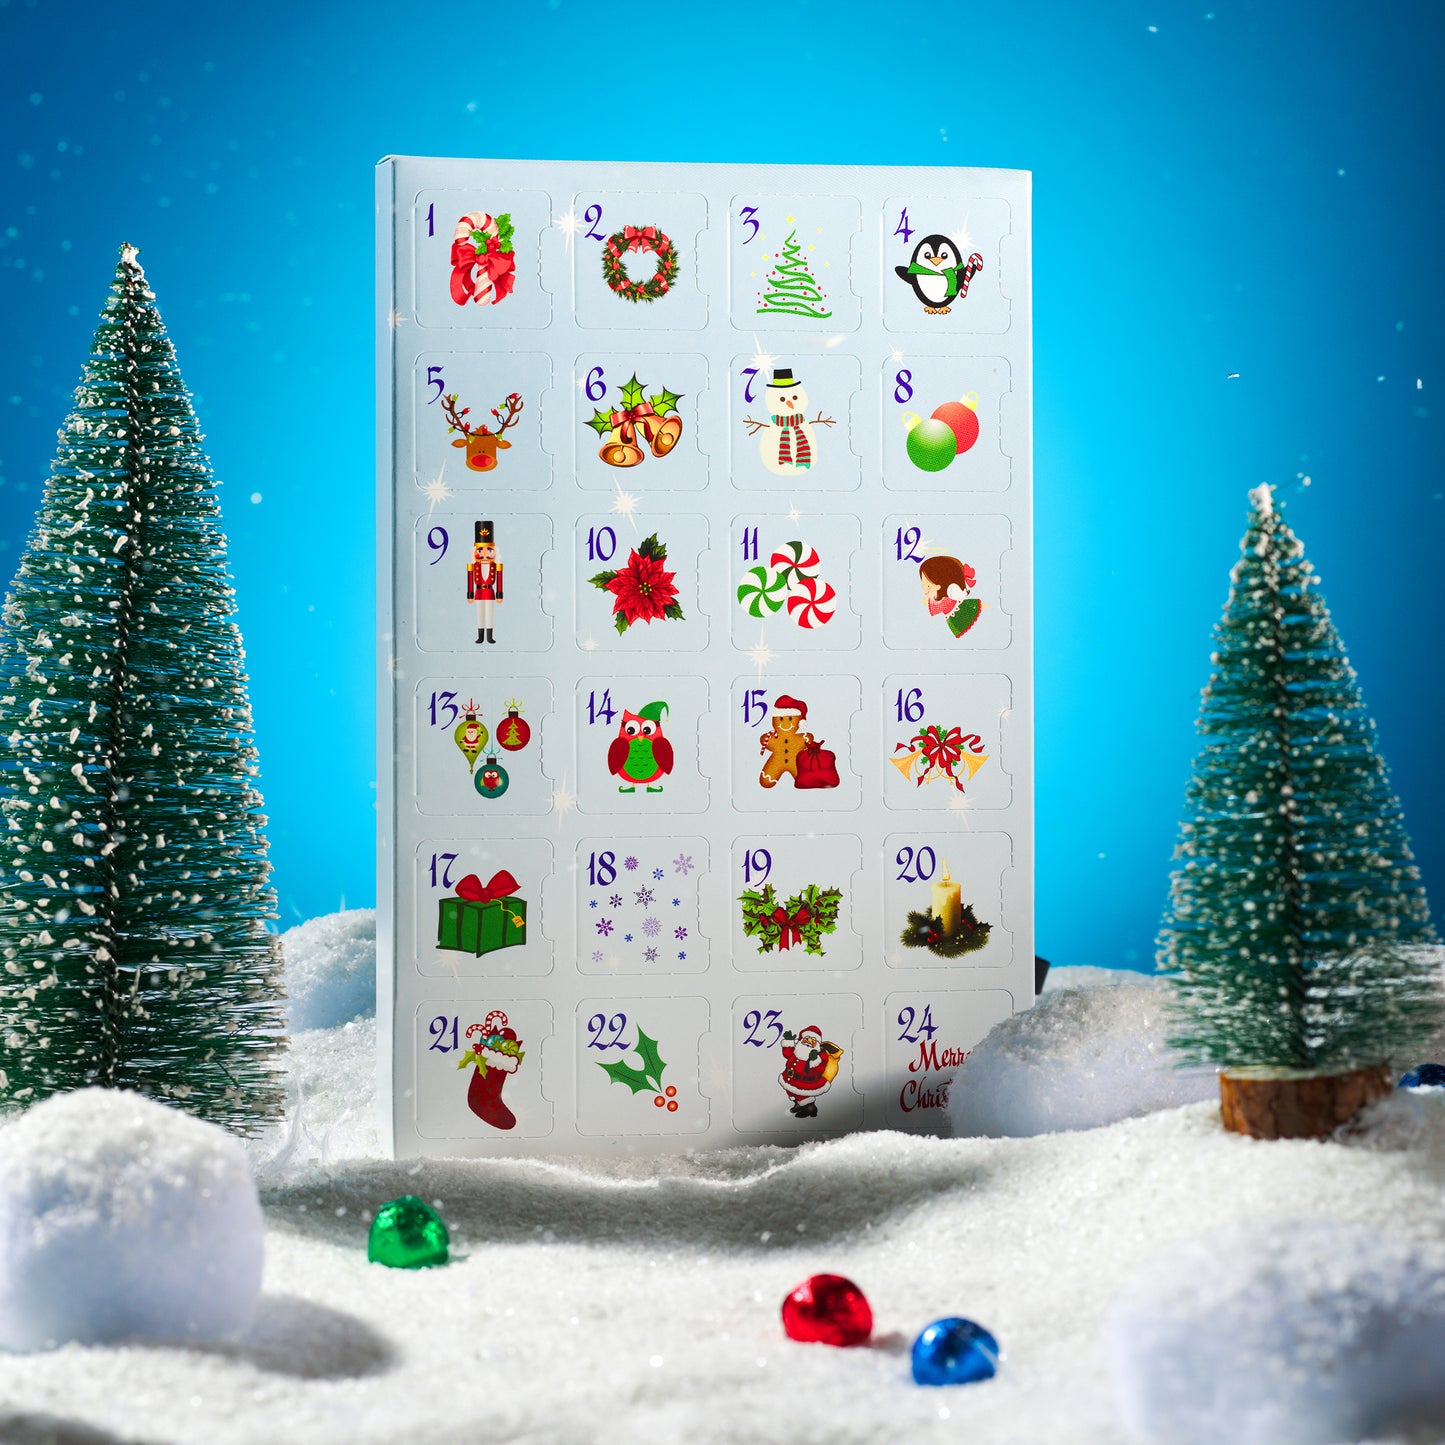 Lovery 24 days Advent calendar, milk chocolate assortment, countdown to Christmas, festive holiday designs, gourmet chocolates for each day, Yuletide treats, unique Christmas shapes, premium milk chocolate pieces, festive gift for all ages, delightful holiday surprise, Christmas spirit enhancer